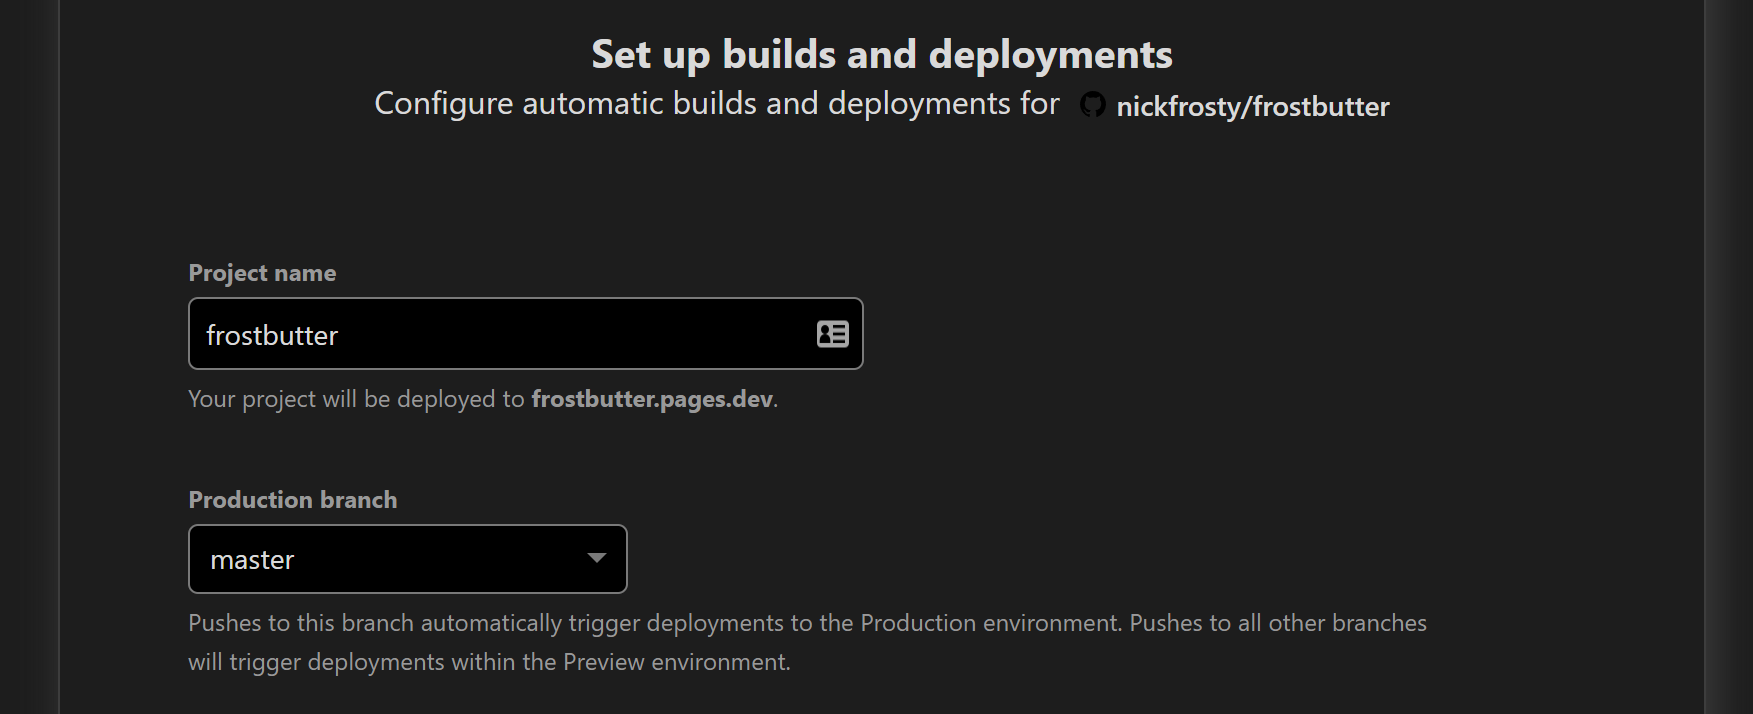 Name your project and select the production branch